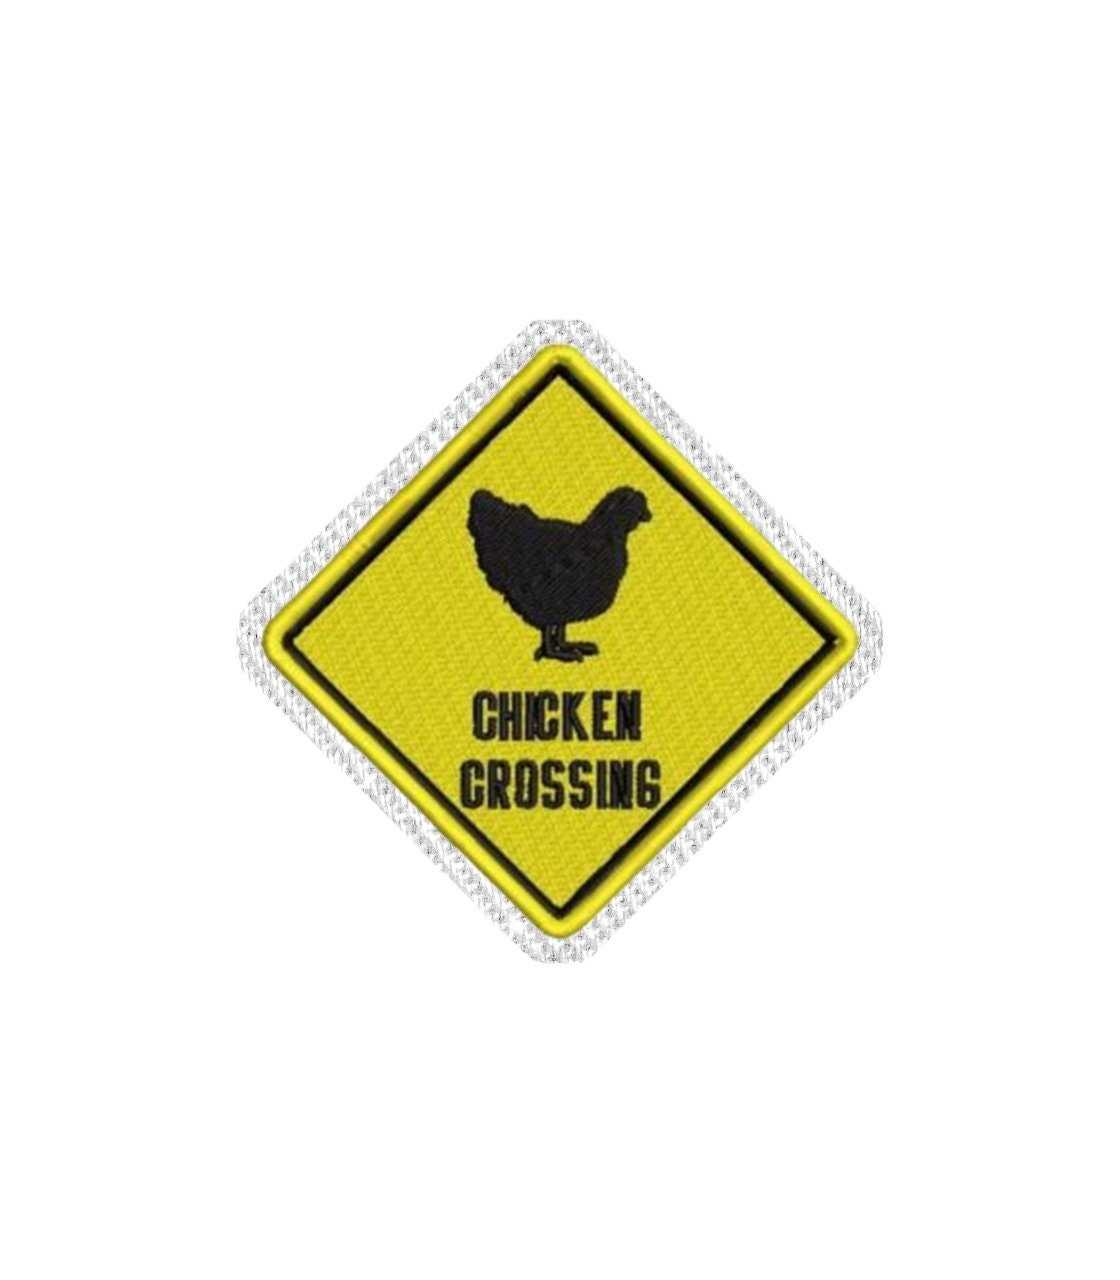 Chicken Crossing Sign Iron on Patch / Sew on embroidered patches Home Farm Country Embroidery Women Applique Merit Badge for Clothing Jacket